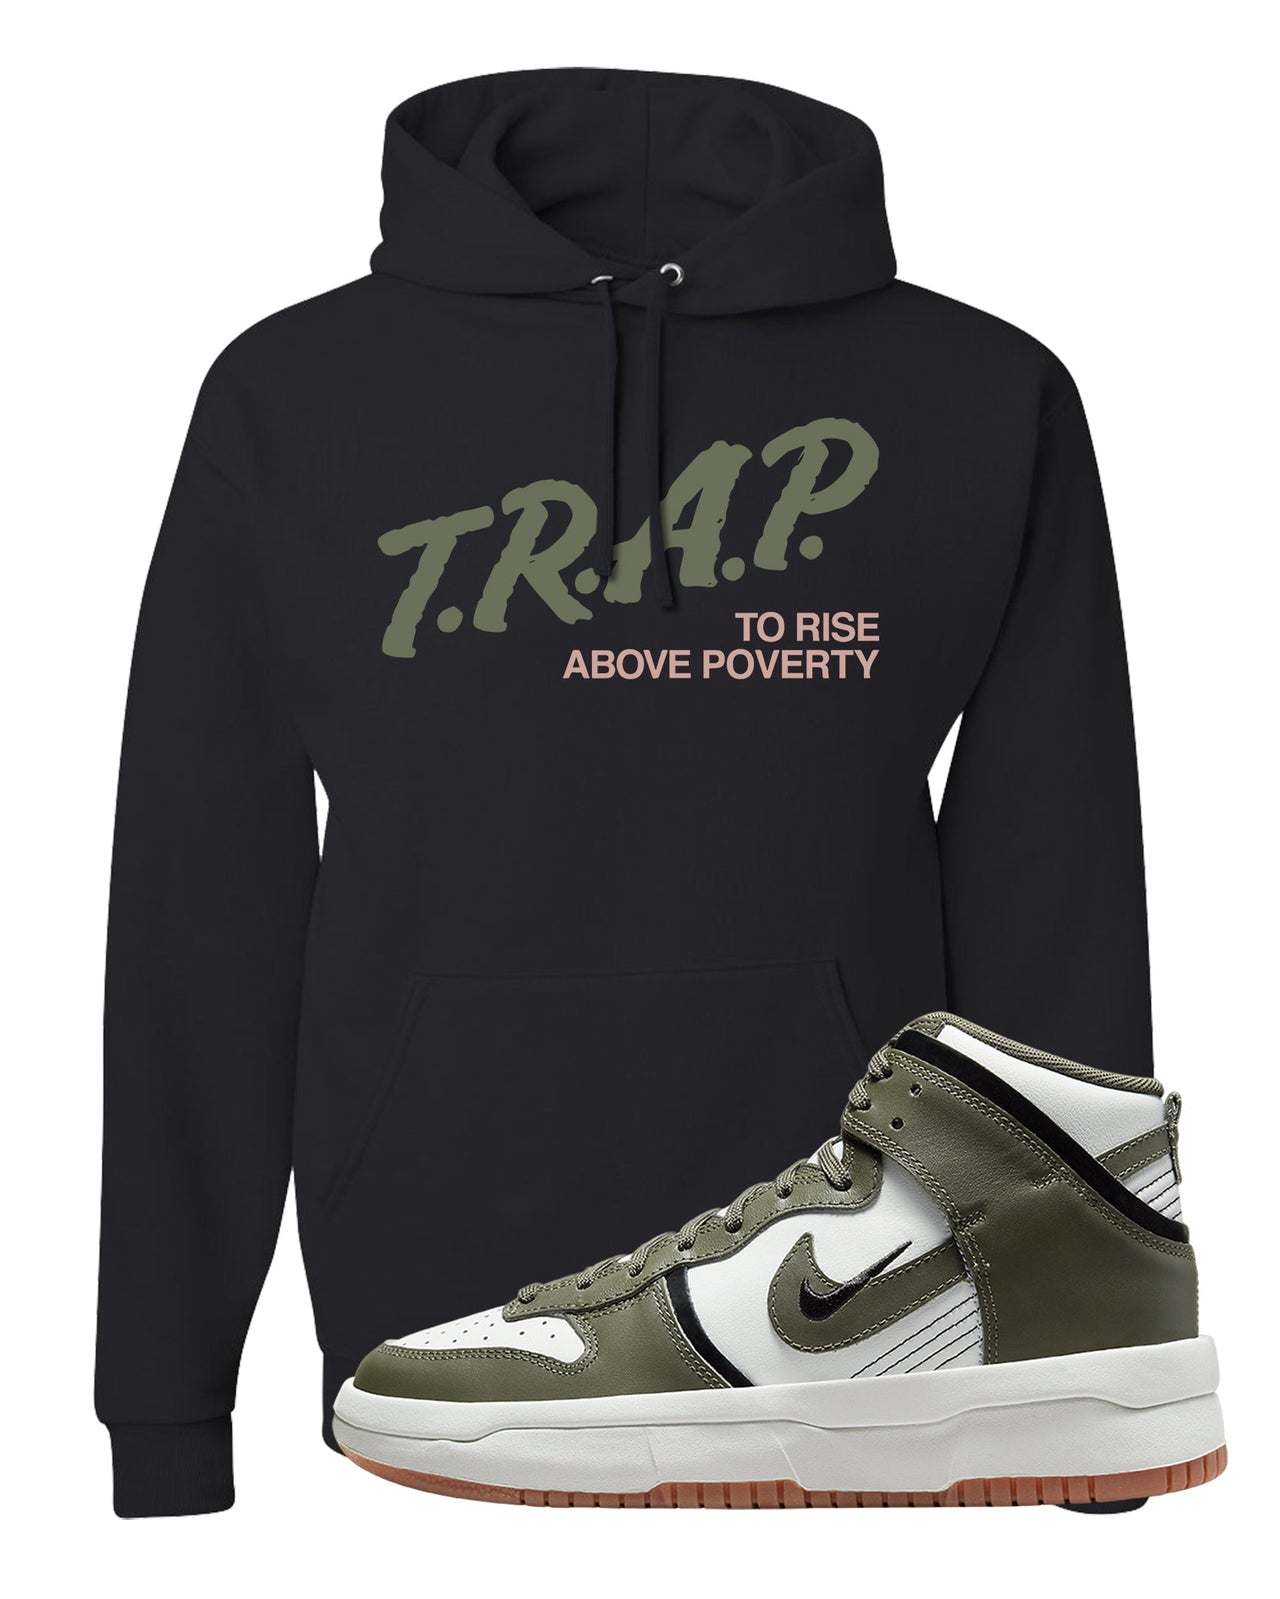 Cargo Khaki Rebel High Dunks Hoodie | Trap To Rise Above Poverty, Black